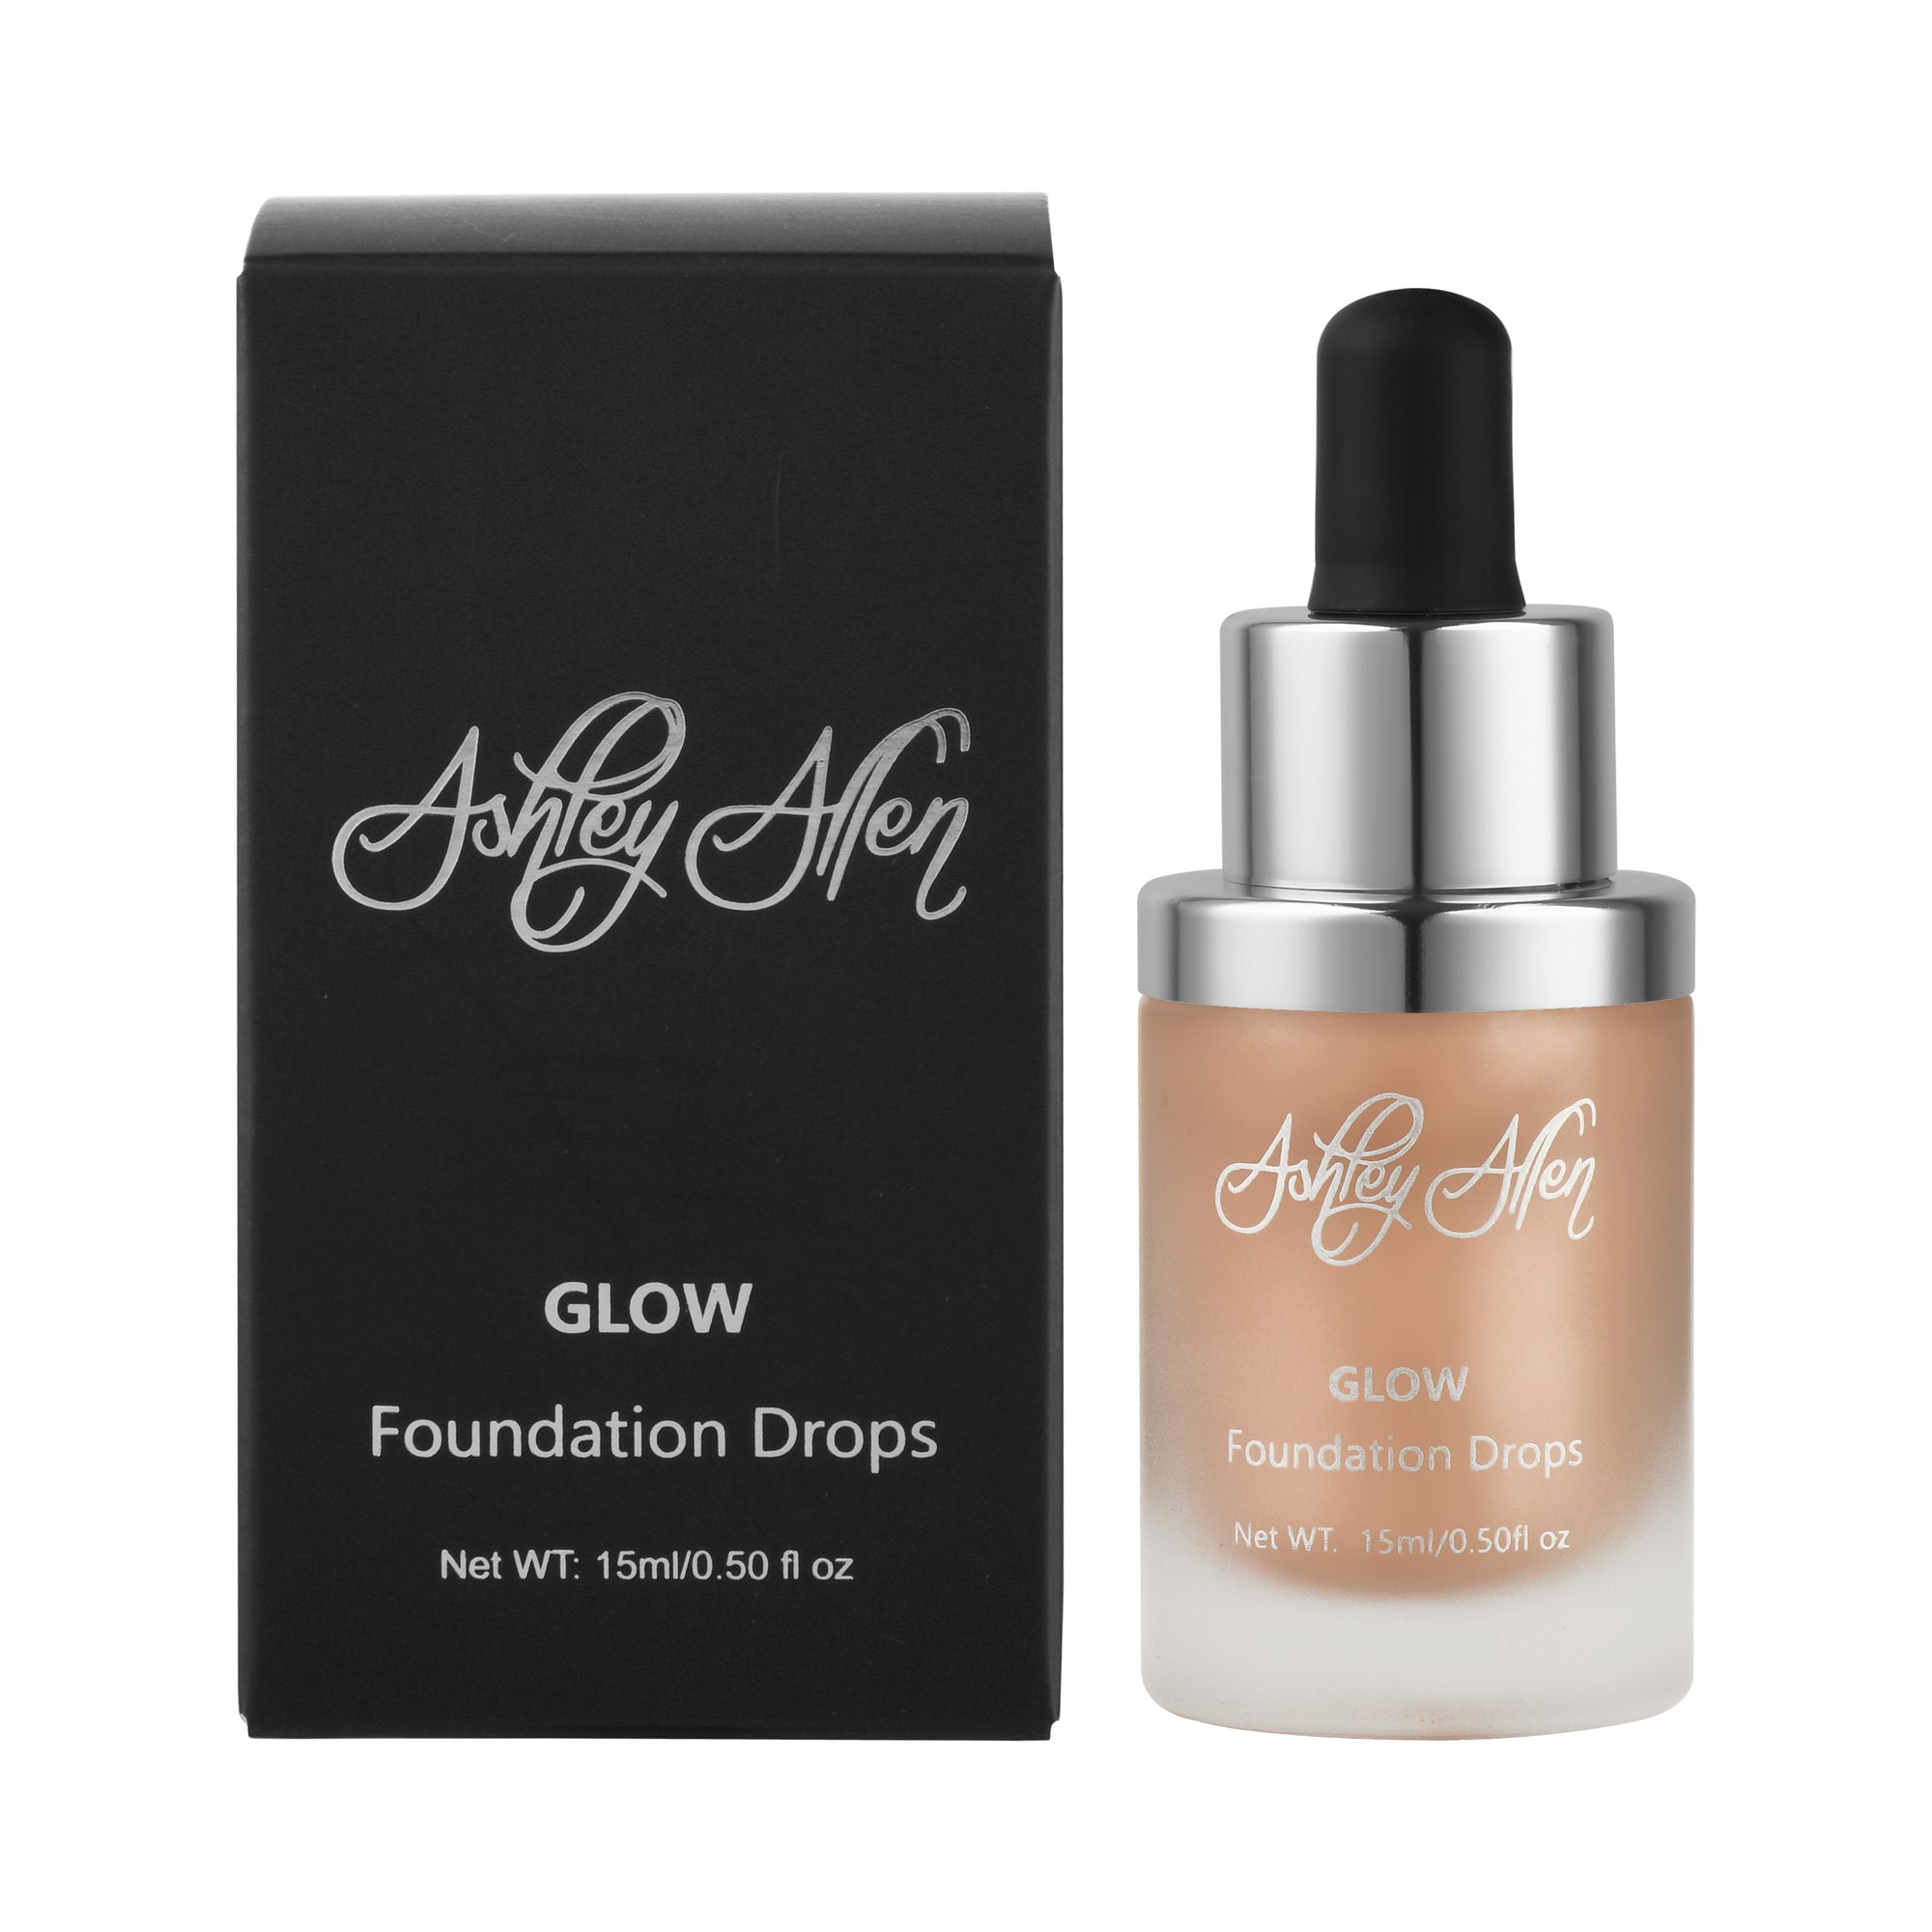 Glow Foundation Drops - Light (50% OFF) will be 17.50 activated at checkout